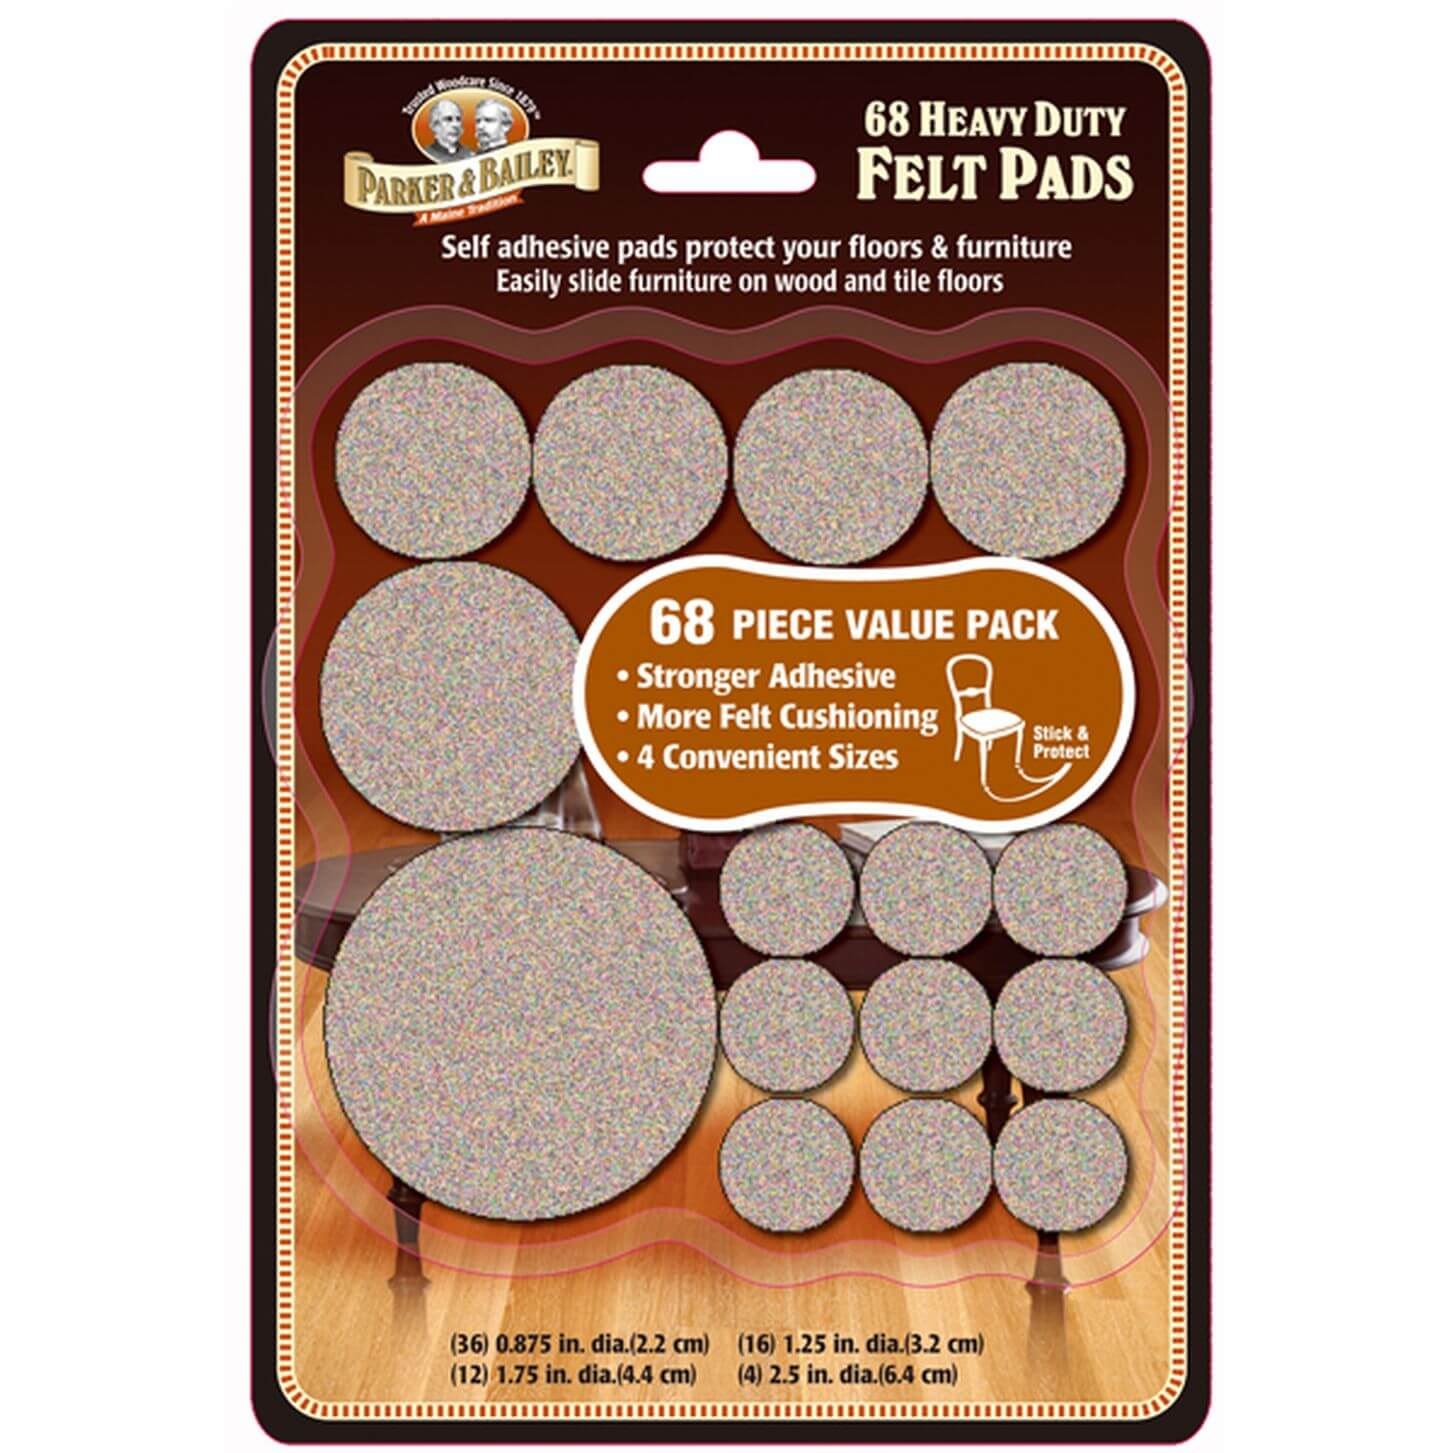 Parker & Bailey Assorted Heavy Duty Felt Pads 68 Pack - LAUNDRY - Cleaning - Soko and Co